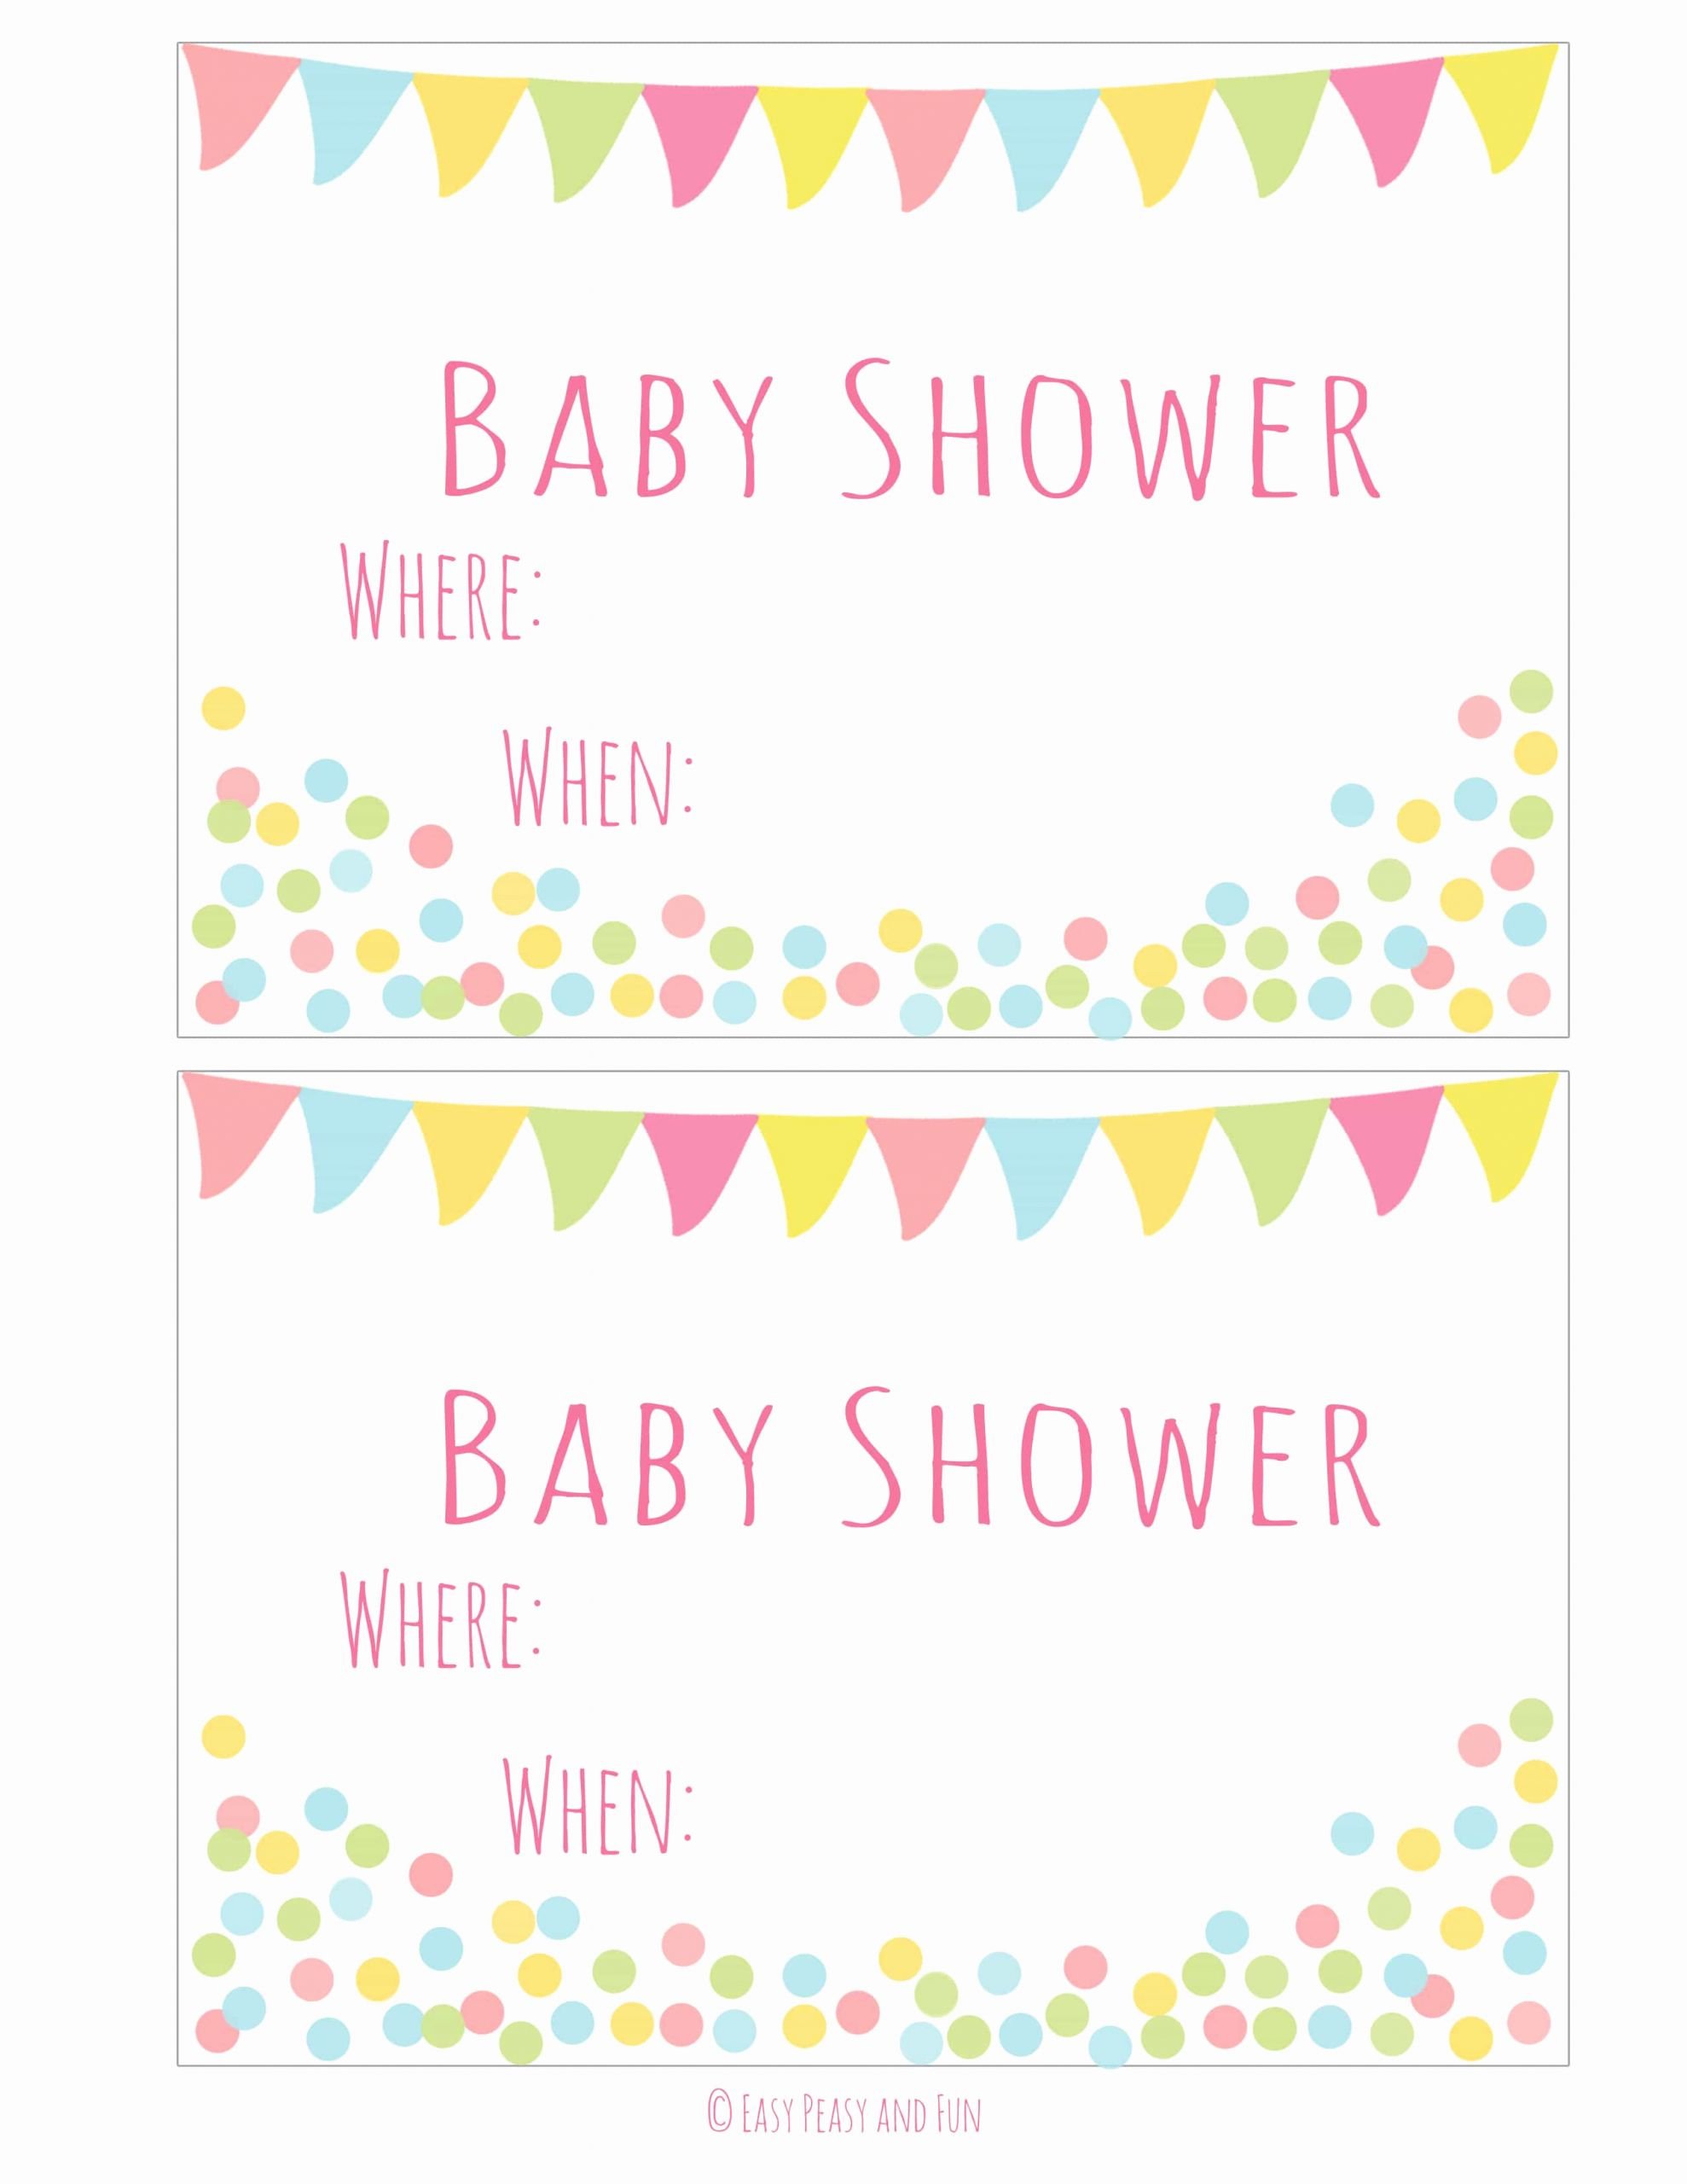 Free Shower Invitation Template Awesome Free Printable Baby Shower Invitation Easy Peasy and Fun